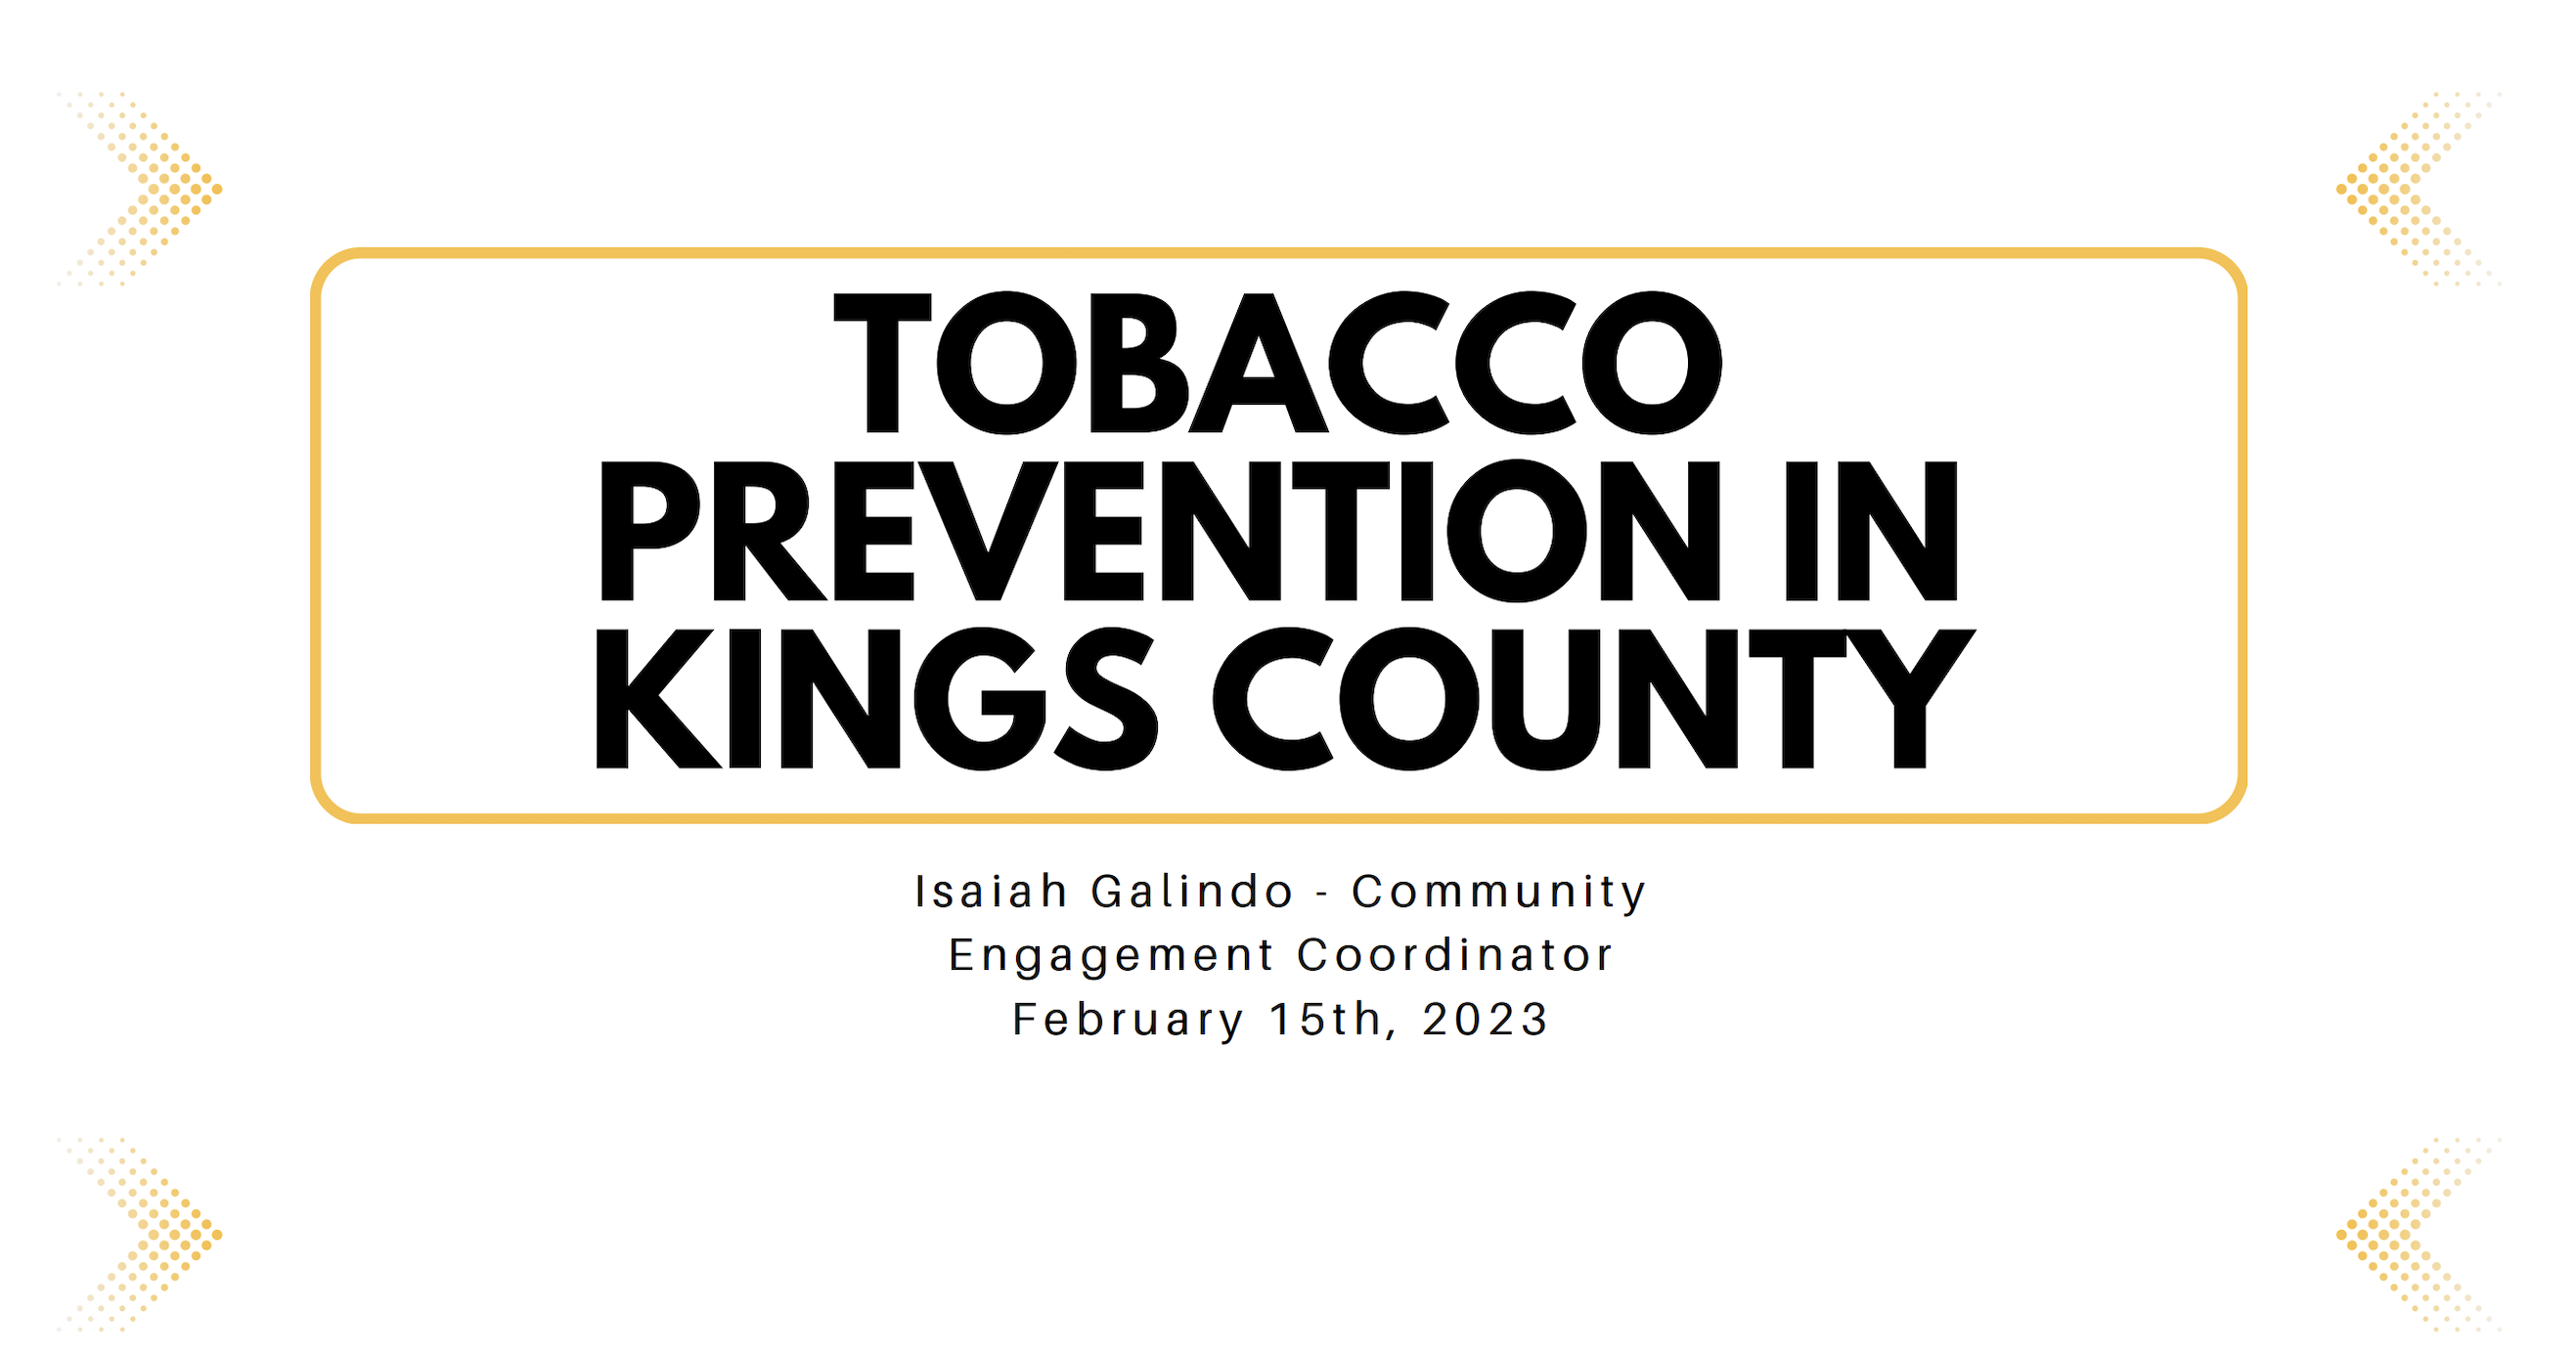 Tobacco Prevention in Kings County